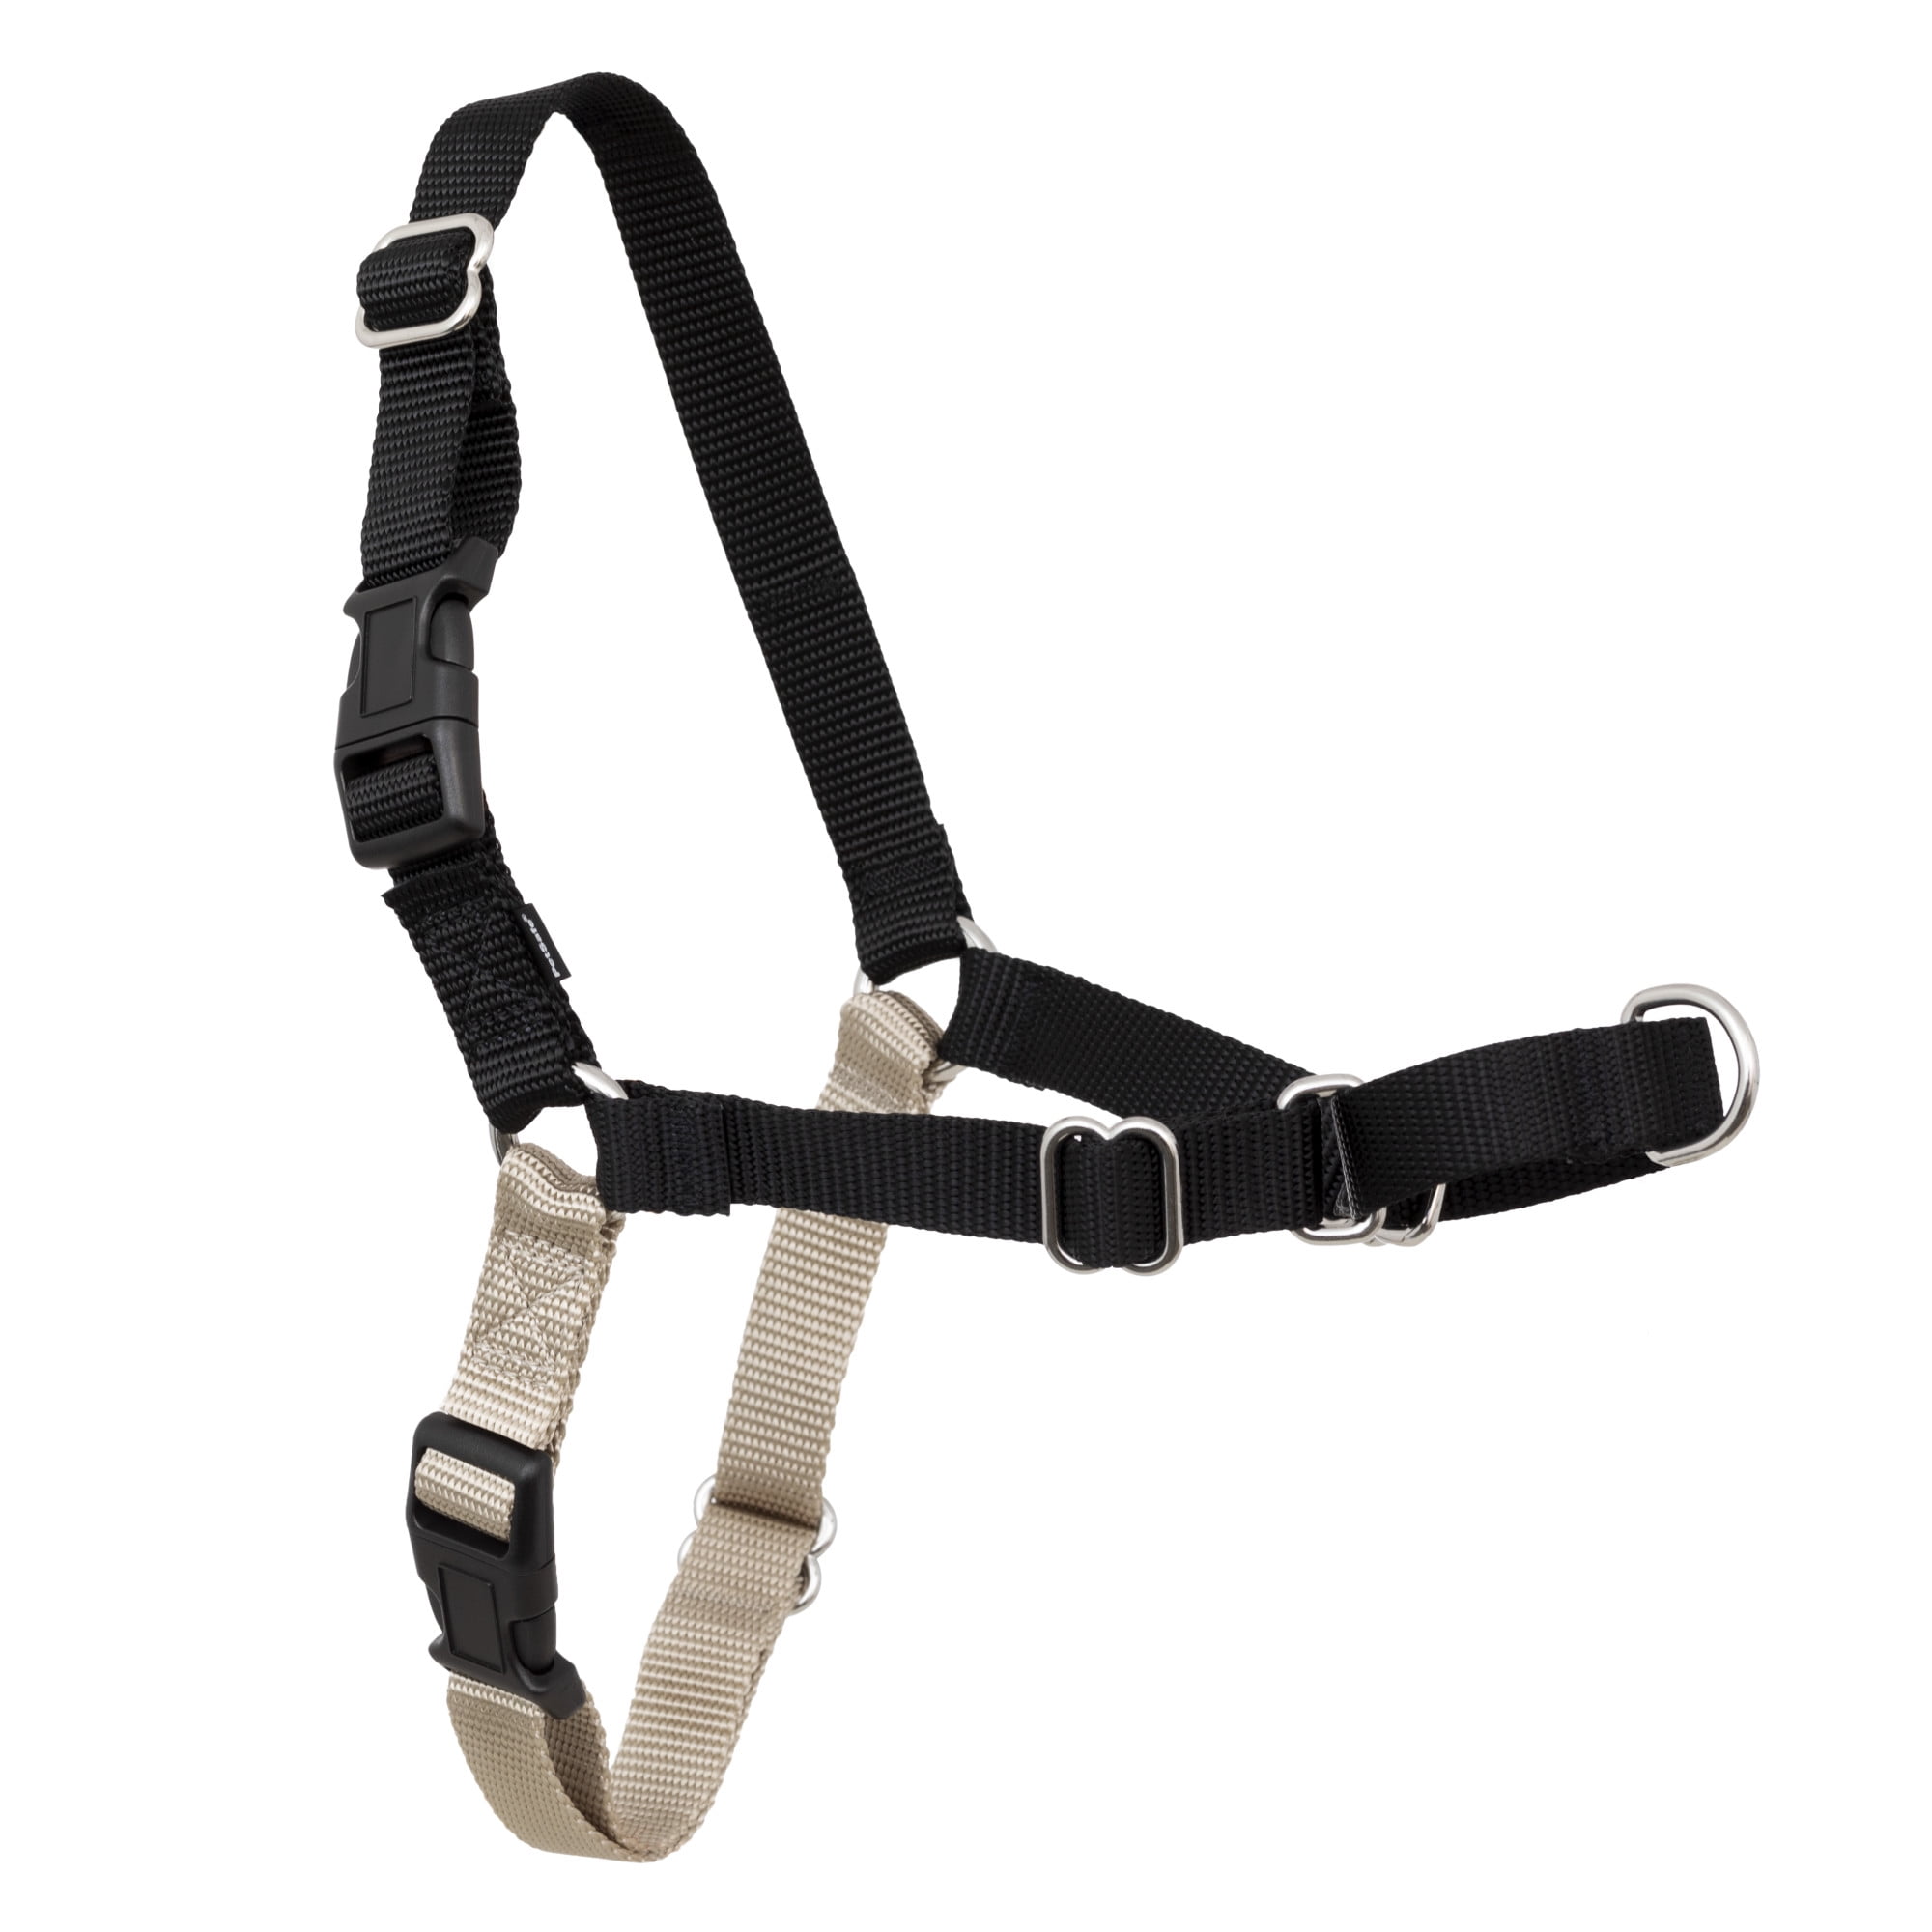 EASY WALK No Pull Dog Harness Gentle Steering Leading Relaxed Control Training